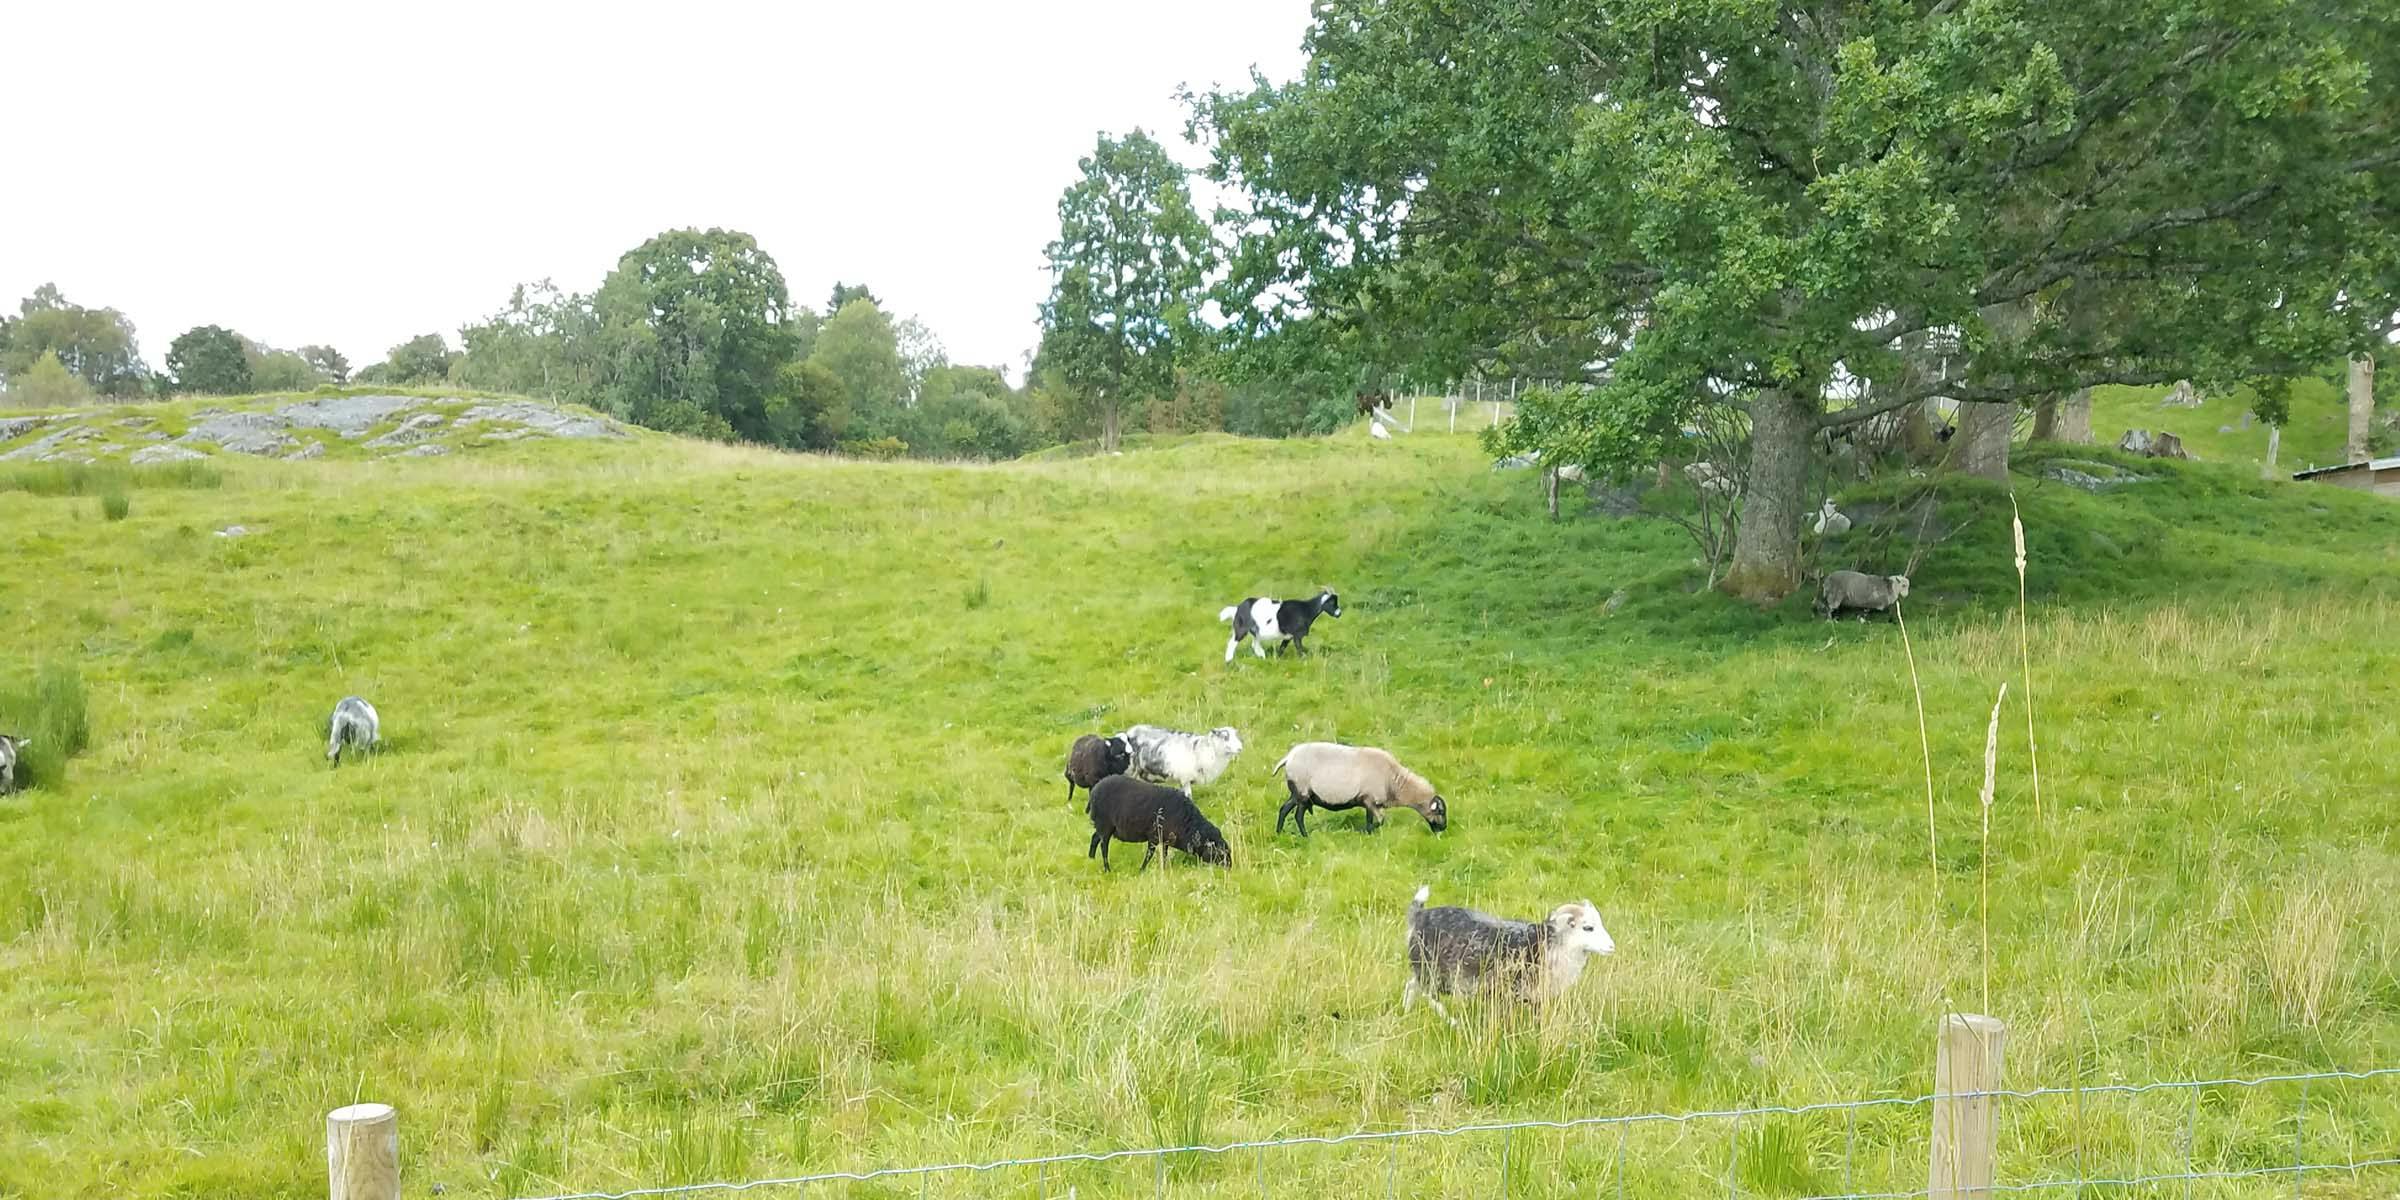 A bright green field with a large leafy tree and sheep grazing